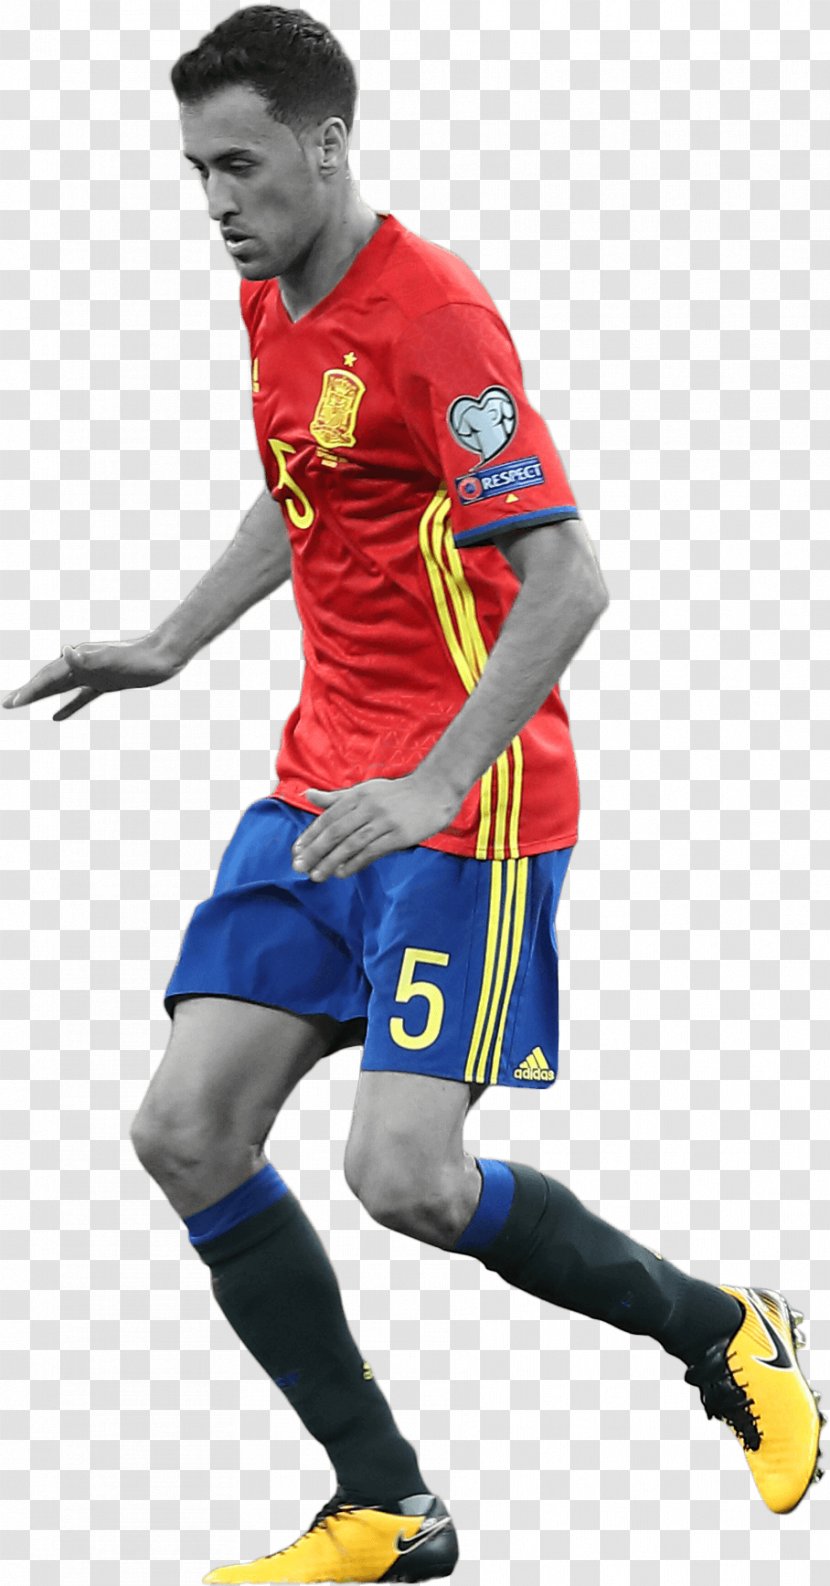 Spain Team Sport Jersey Champions - Soccer Player - Busquets Transparent PNG